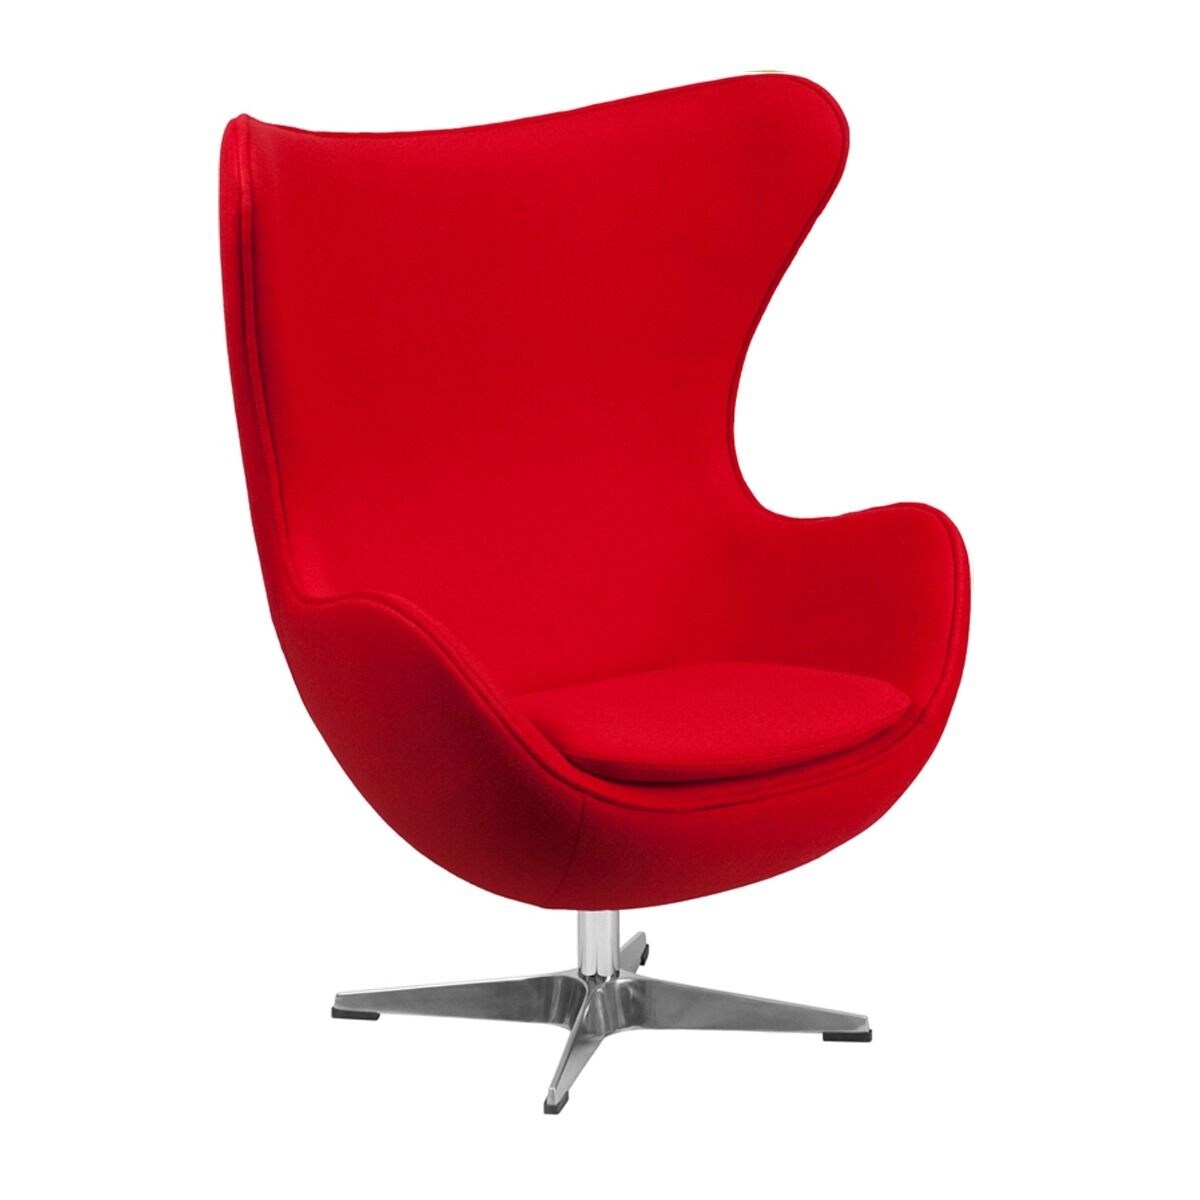 https://ak1.ostkcdn.com/images/products/is/images/direct/4357c4f9f86da32b1ff7e17e10dbe345b70dee92/Mid-Century-Modern-Wool-Fabric-Tilt-Swivel-Lounge-Chair.jpg